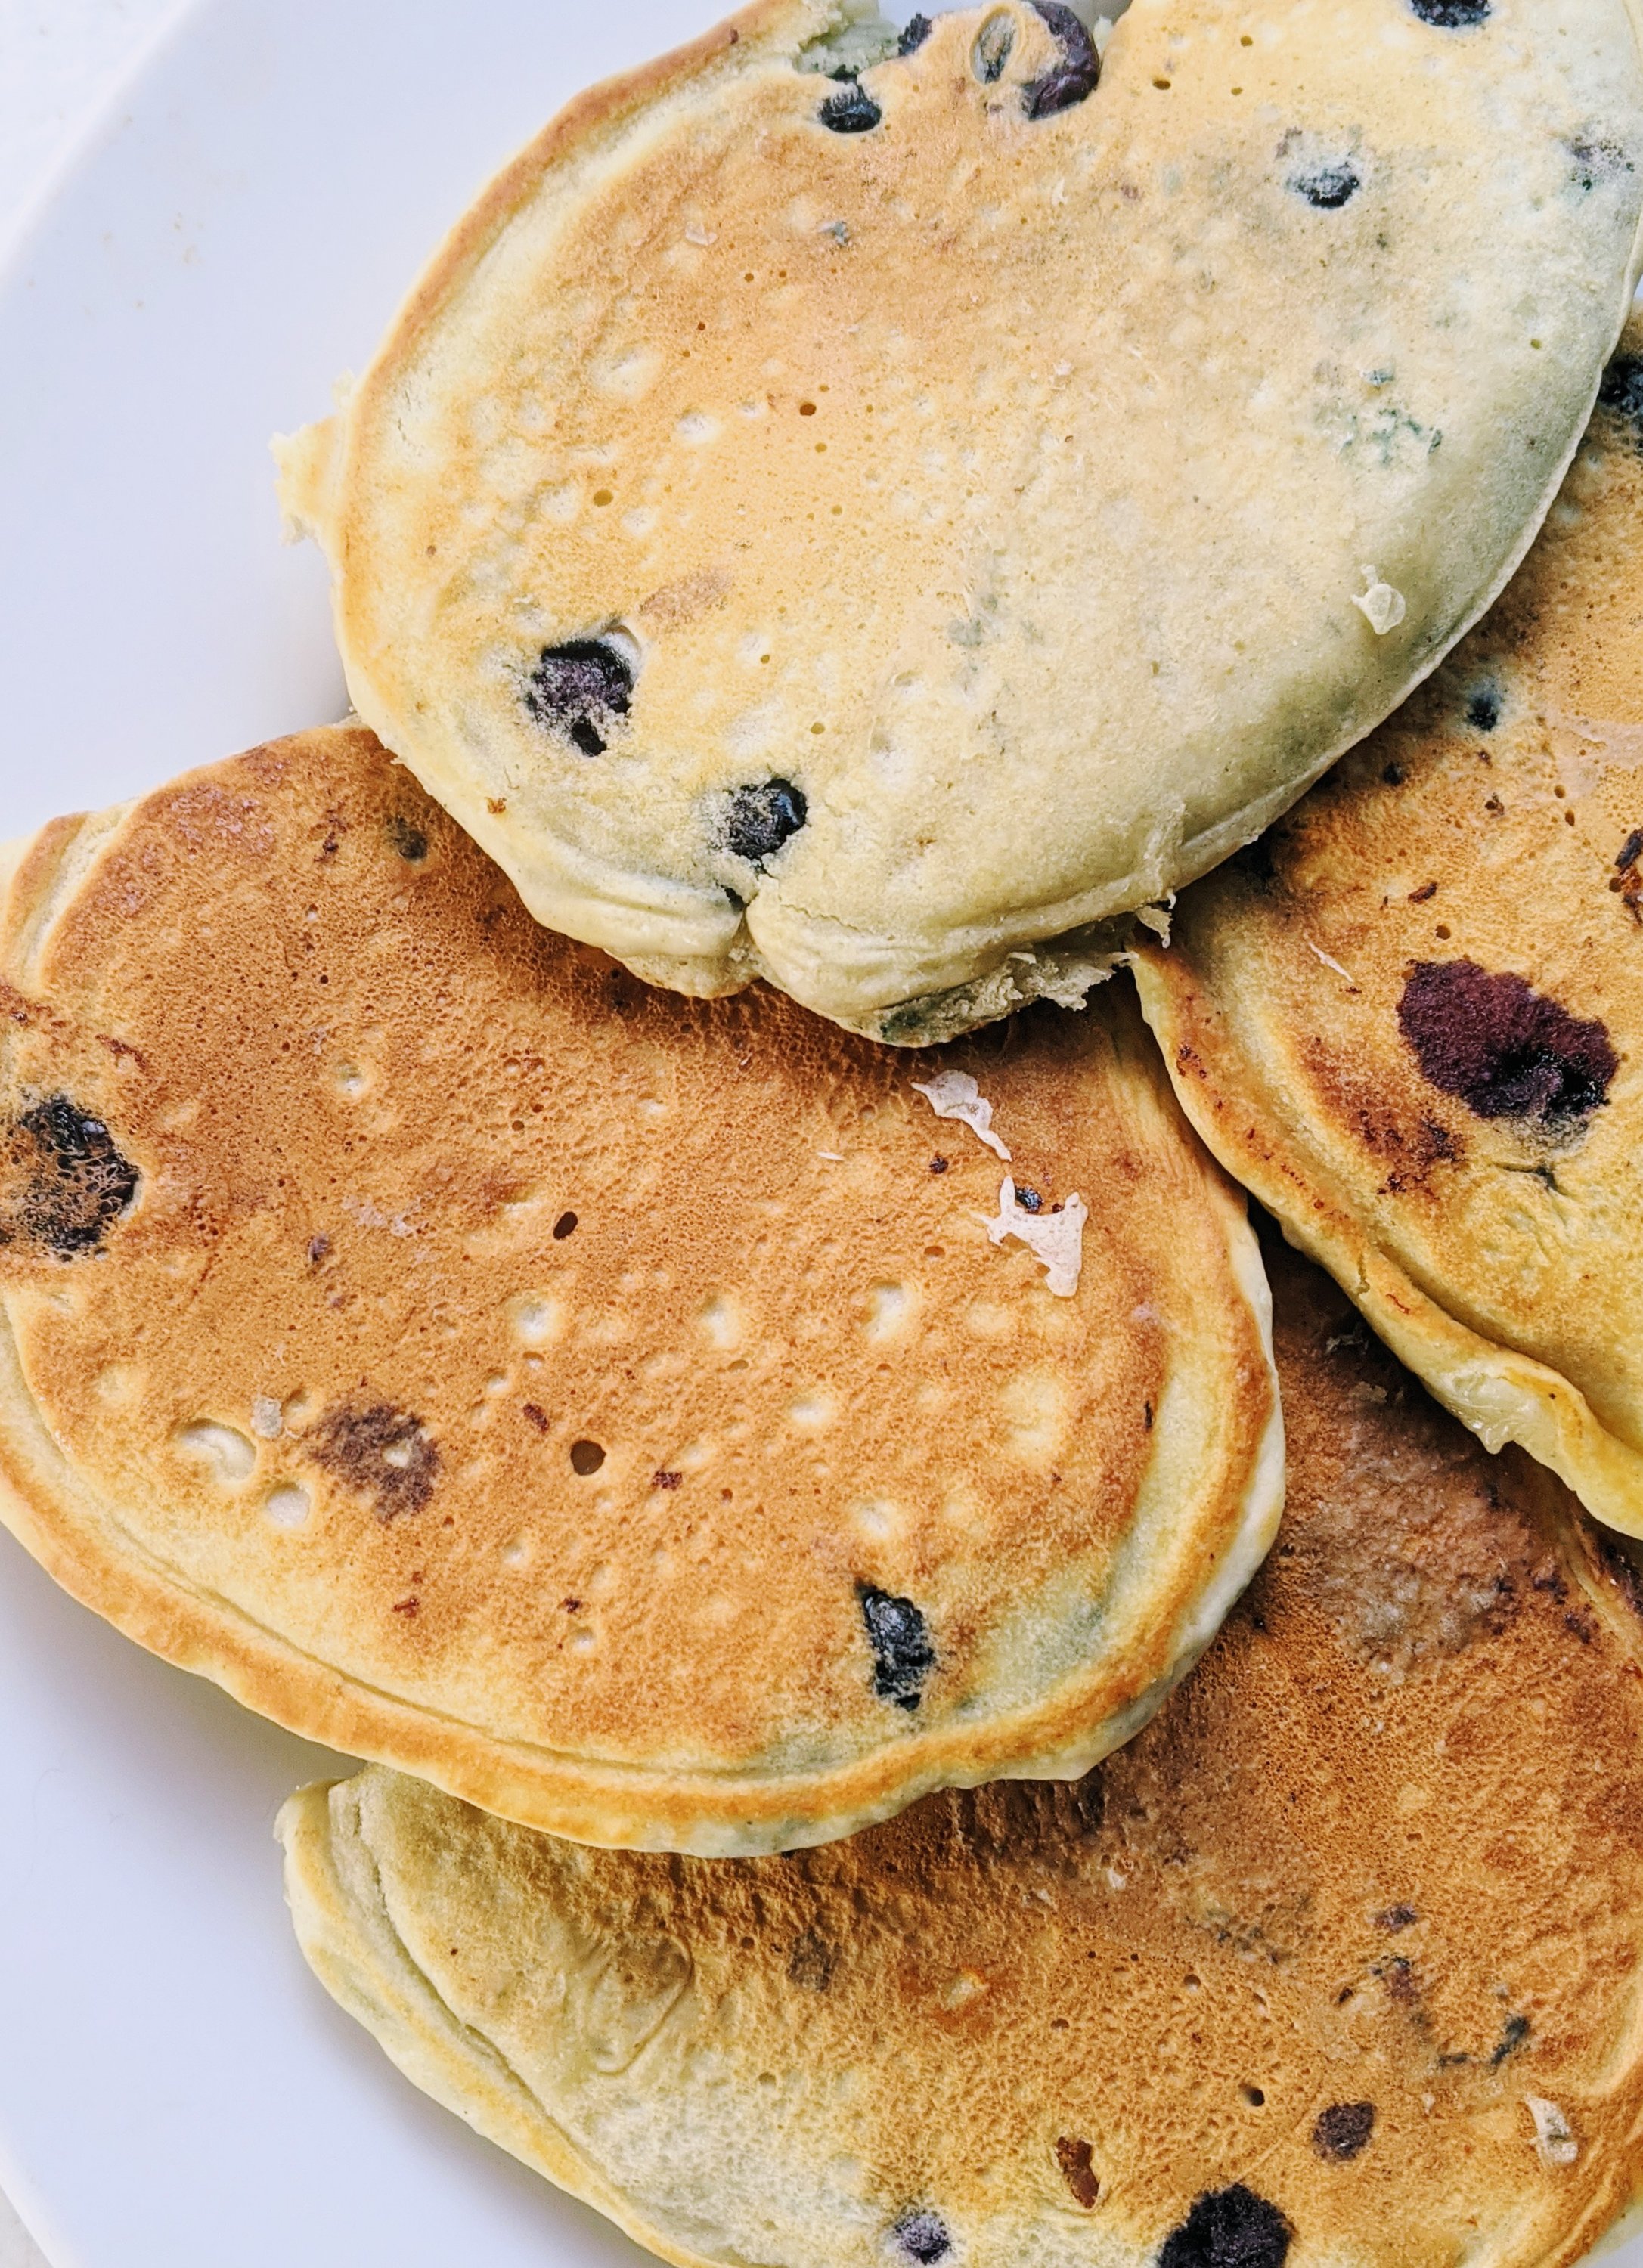 blueberry pancake stack recipe healthy food photography yummy brunch breakfast recipes kids will enjoy the whole family will love